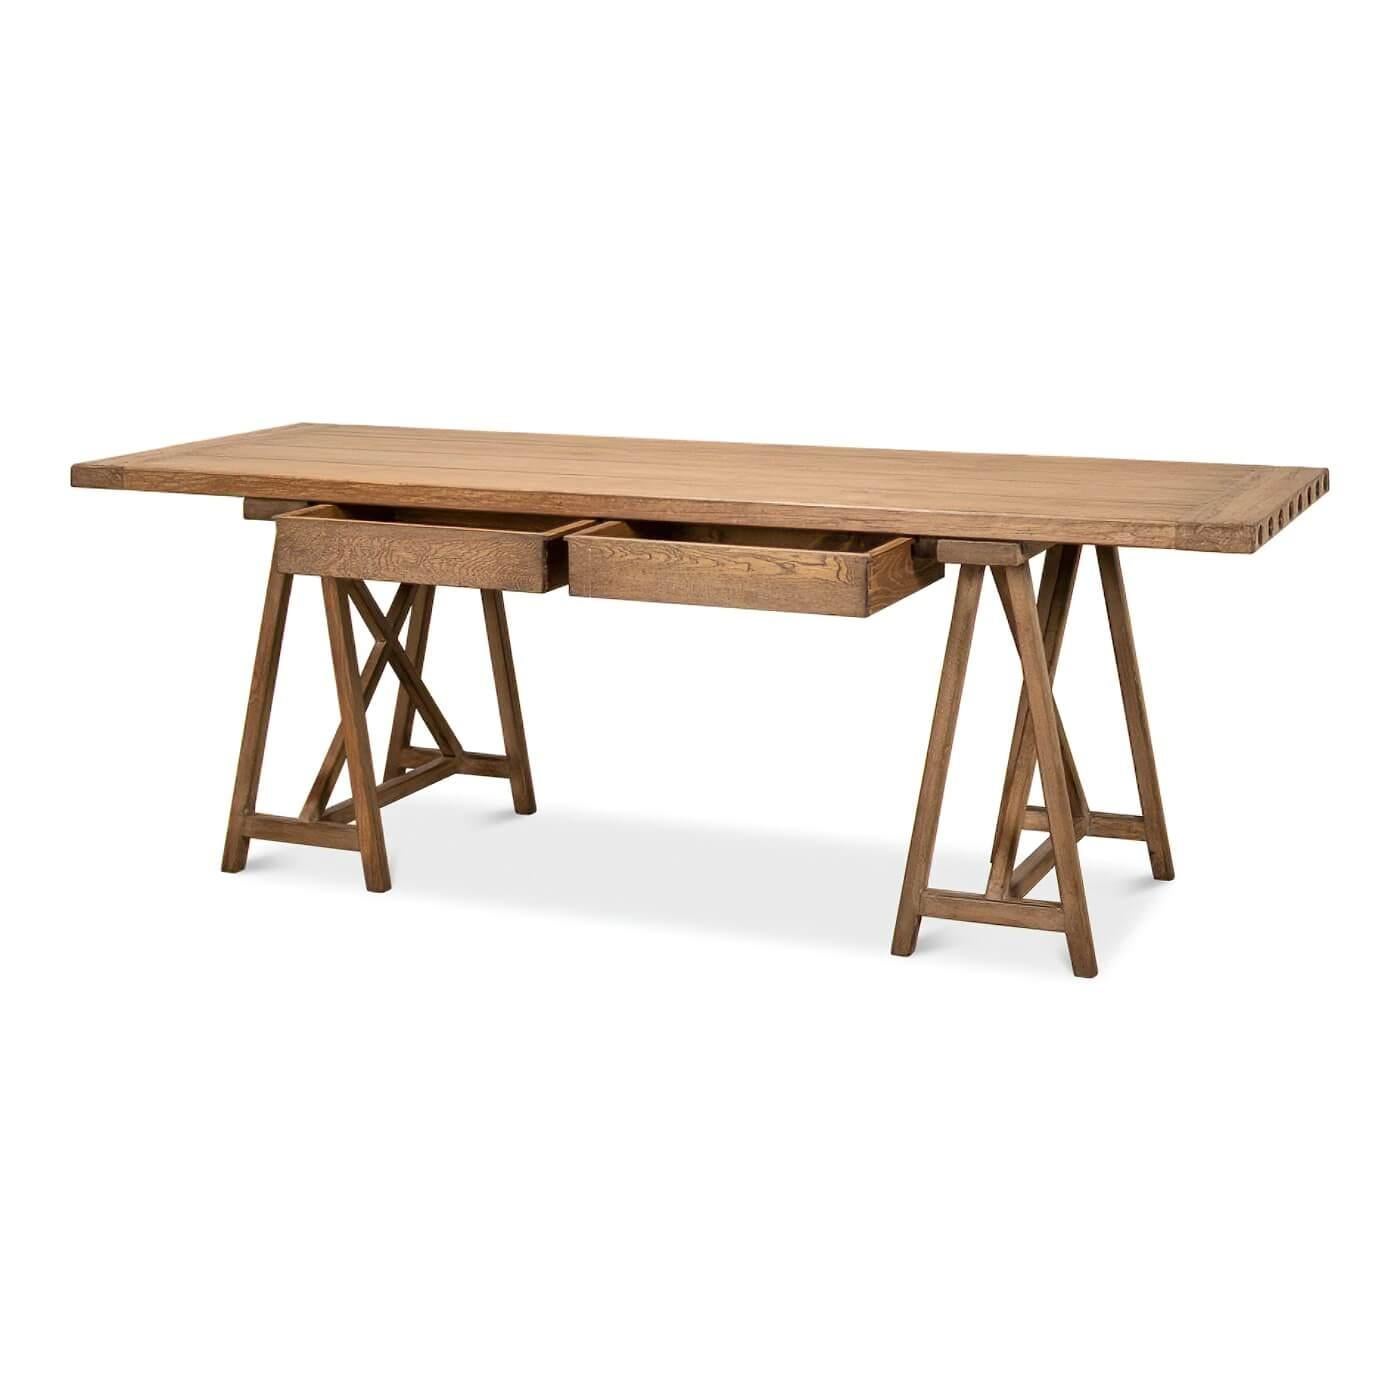 A Rustic reclaimed pine desk with saw-horse inspired base. This unique piece has a reclaimed plank top and is held together with 8 rods and 16 bolts and has 4 functional drawers. This desk is a great transitional piece and can also make a beautiful